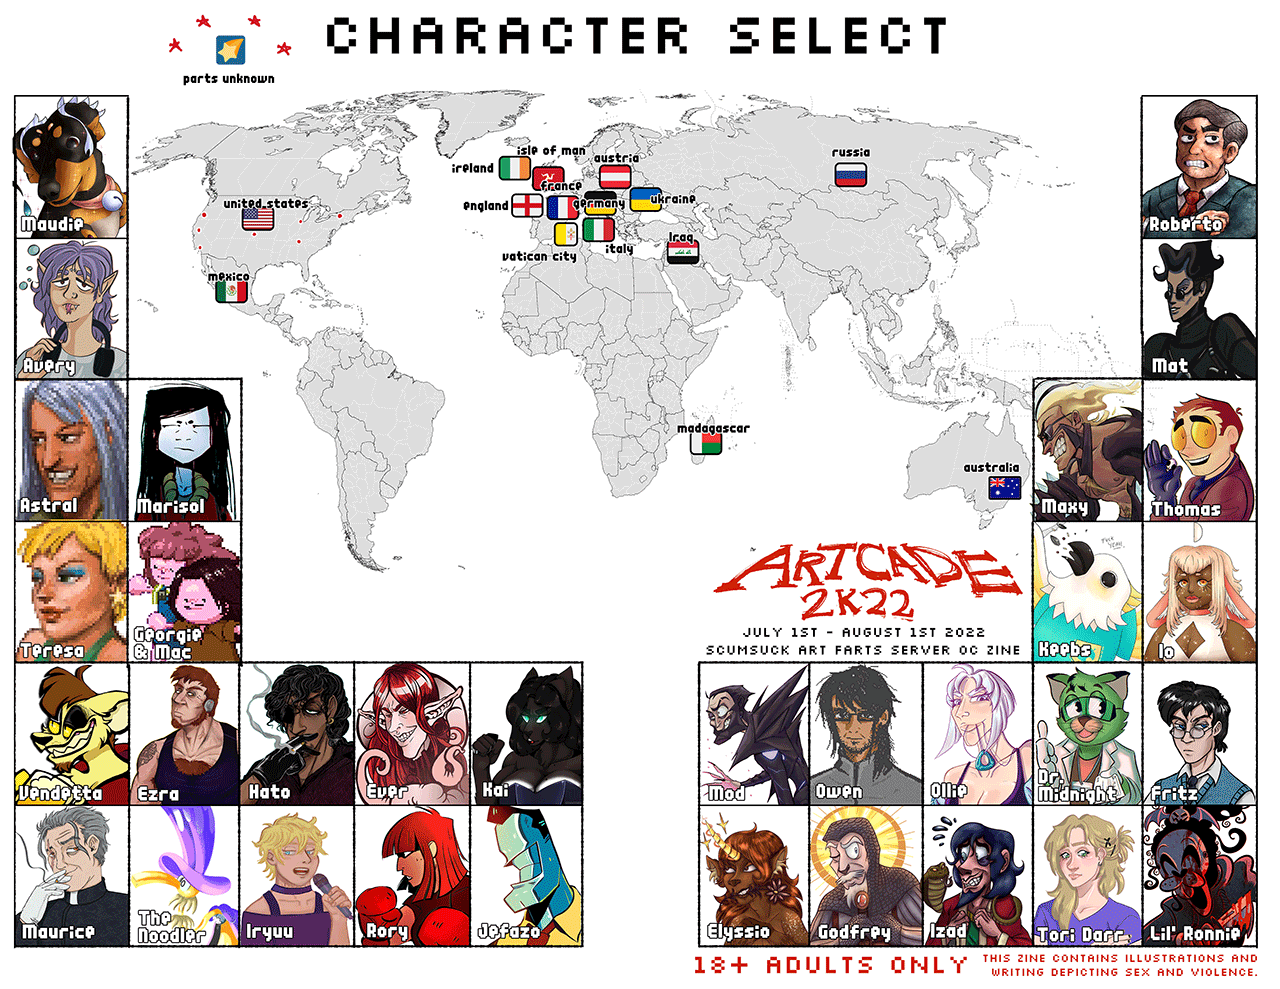 parody of a street fighter character select, featuring characters from people who participated Artcade 2022.  the character portraits surround a world map with flags signifiying where the character's from.